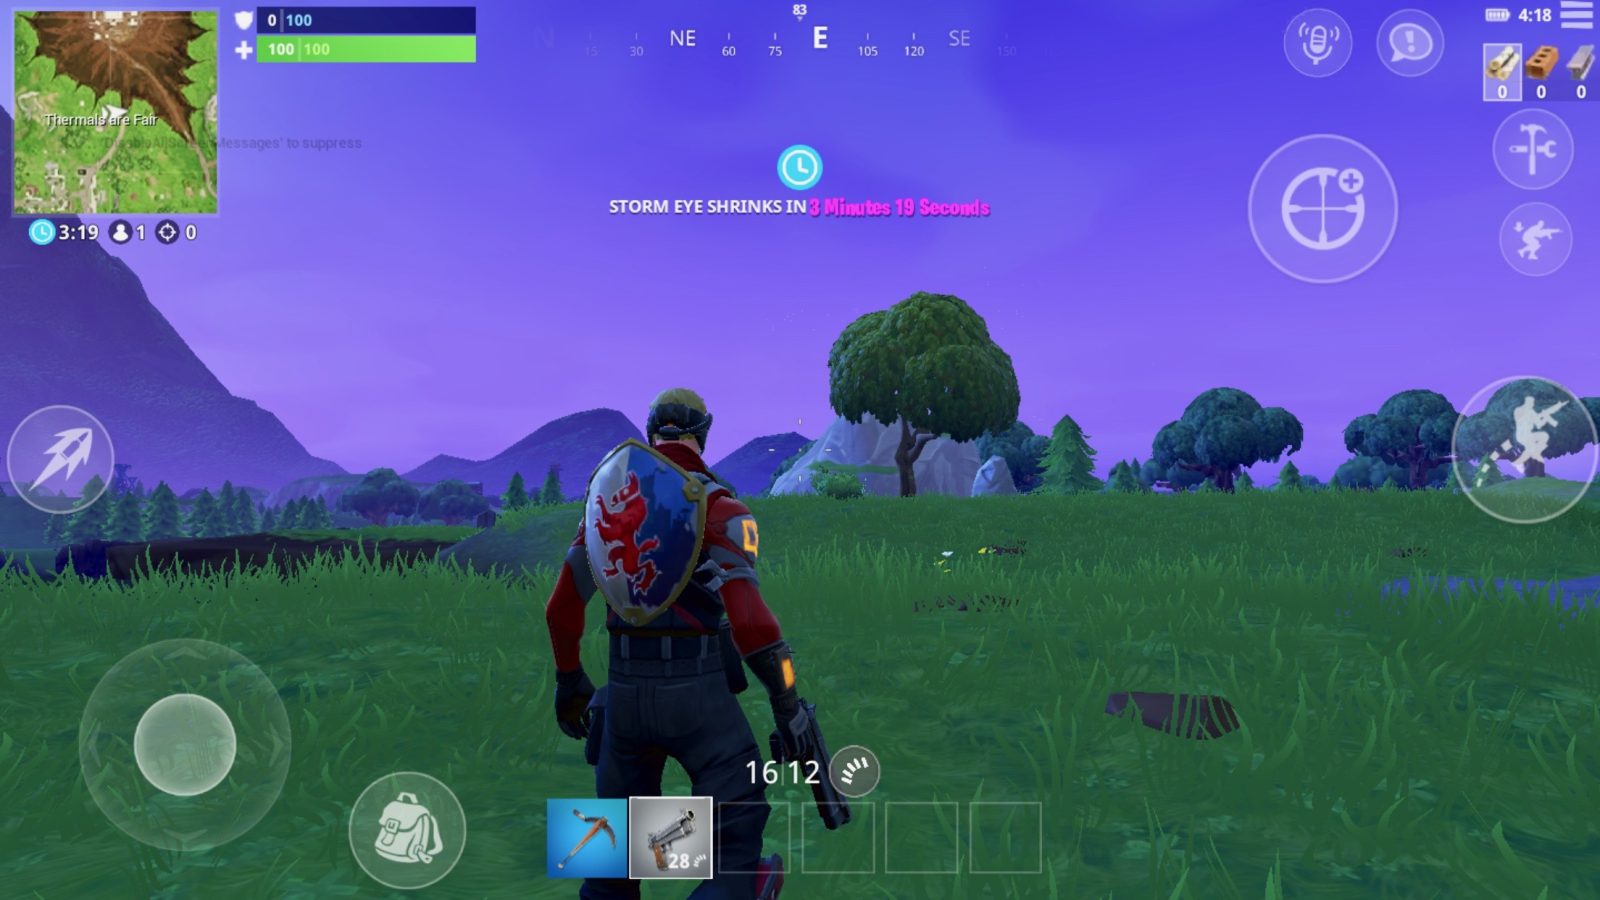 fortnite ios update upgrades game with customizable hud details upcoming features - how to voice chat on fortnite ipad